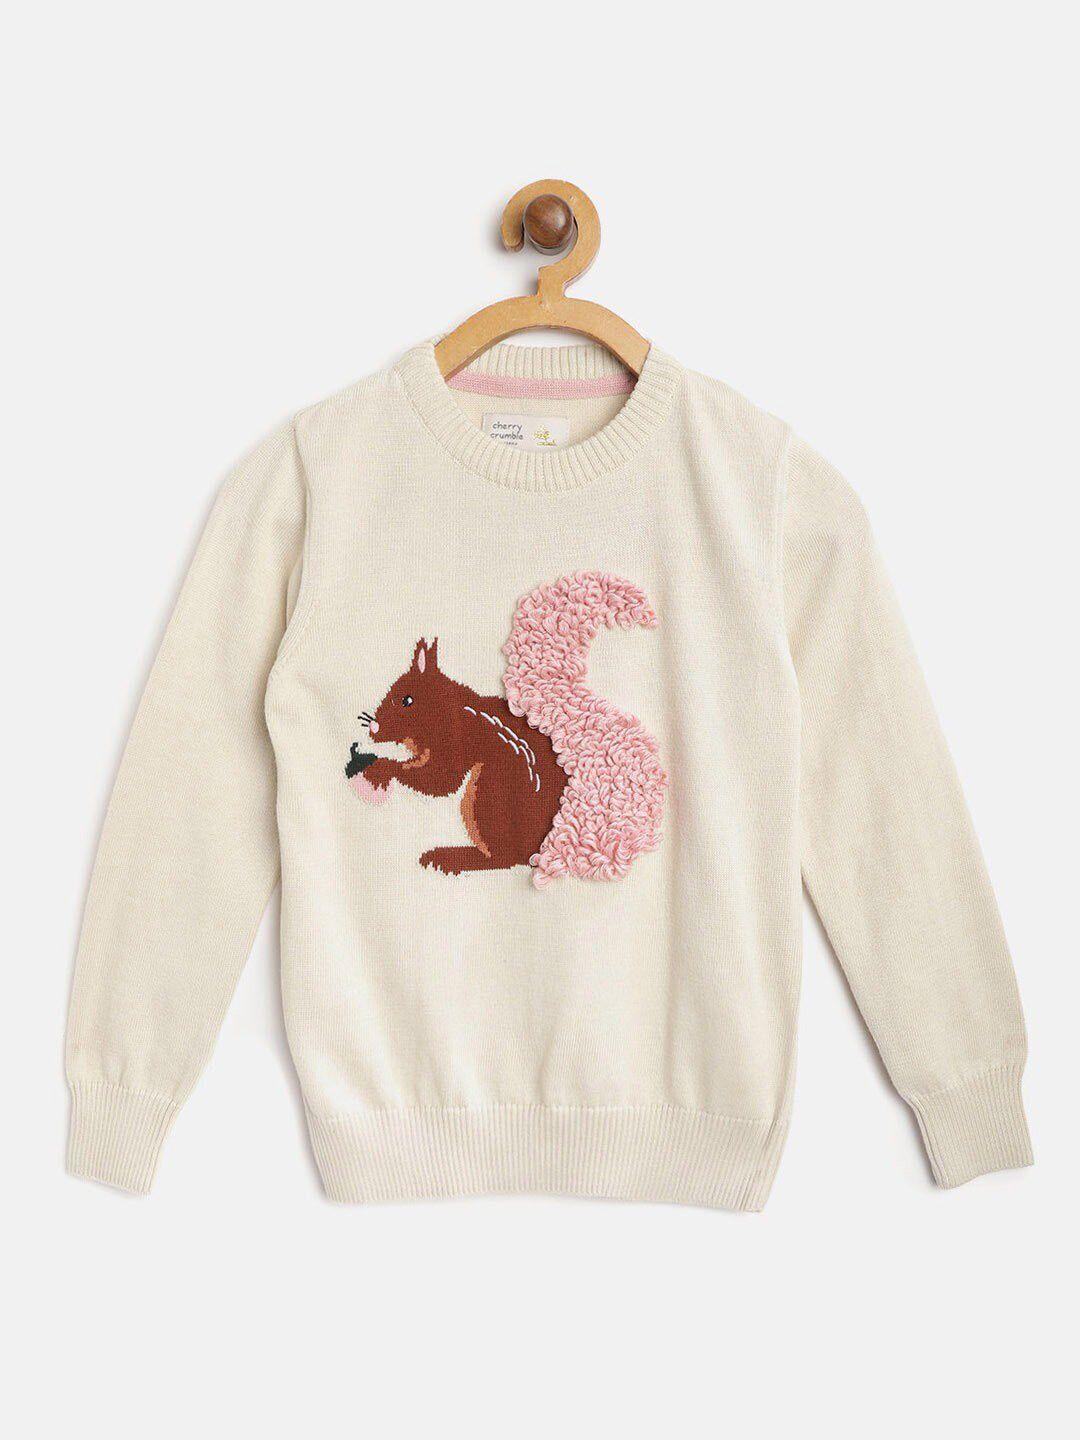 cherry-crumble-unisex-kids-cream-coloured-&-brown-animal-polyester-pu-coated-pullover